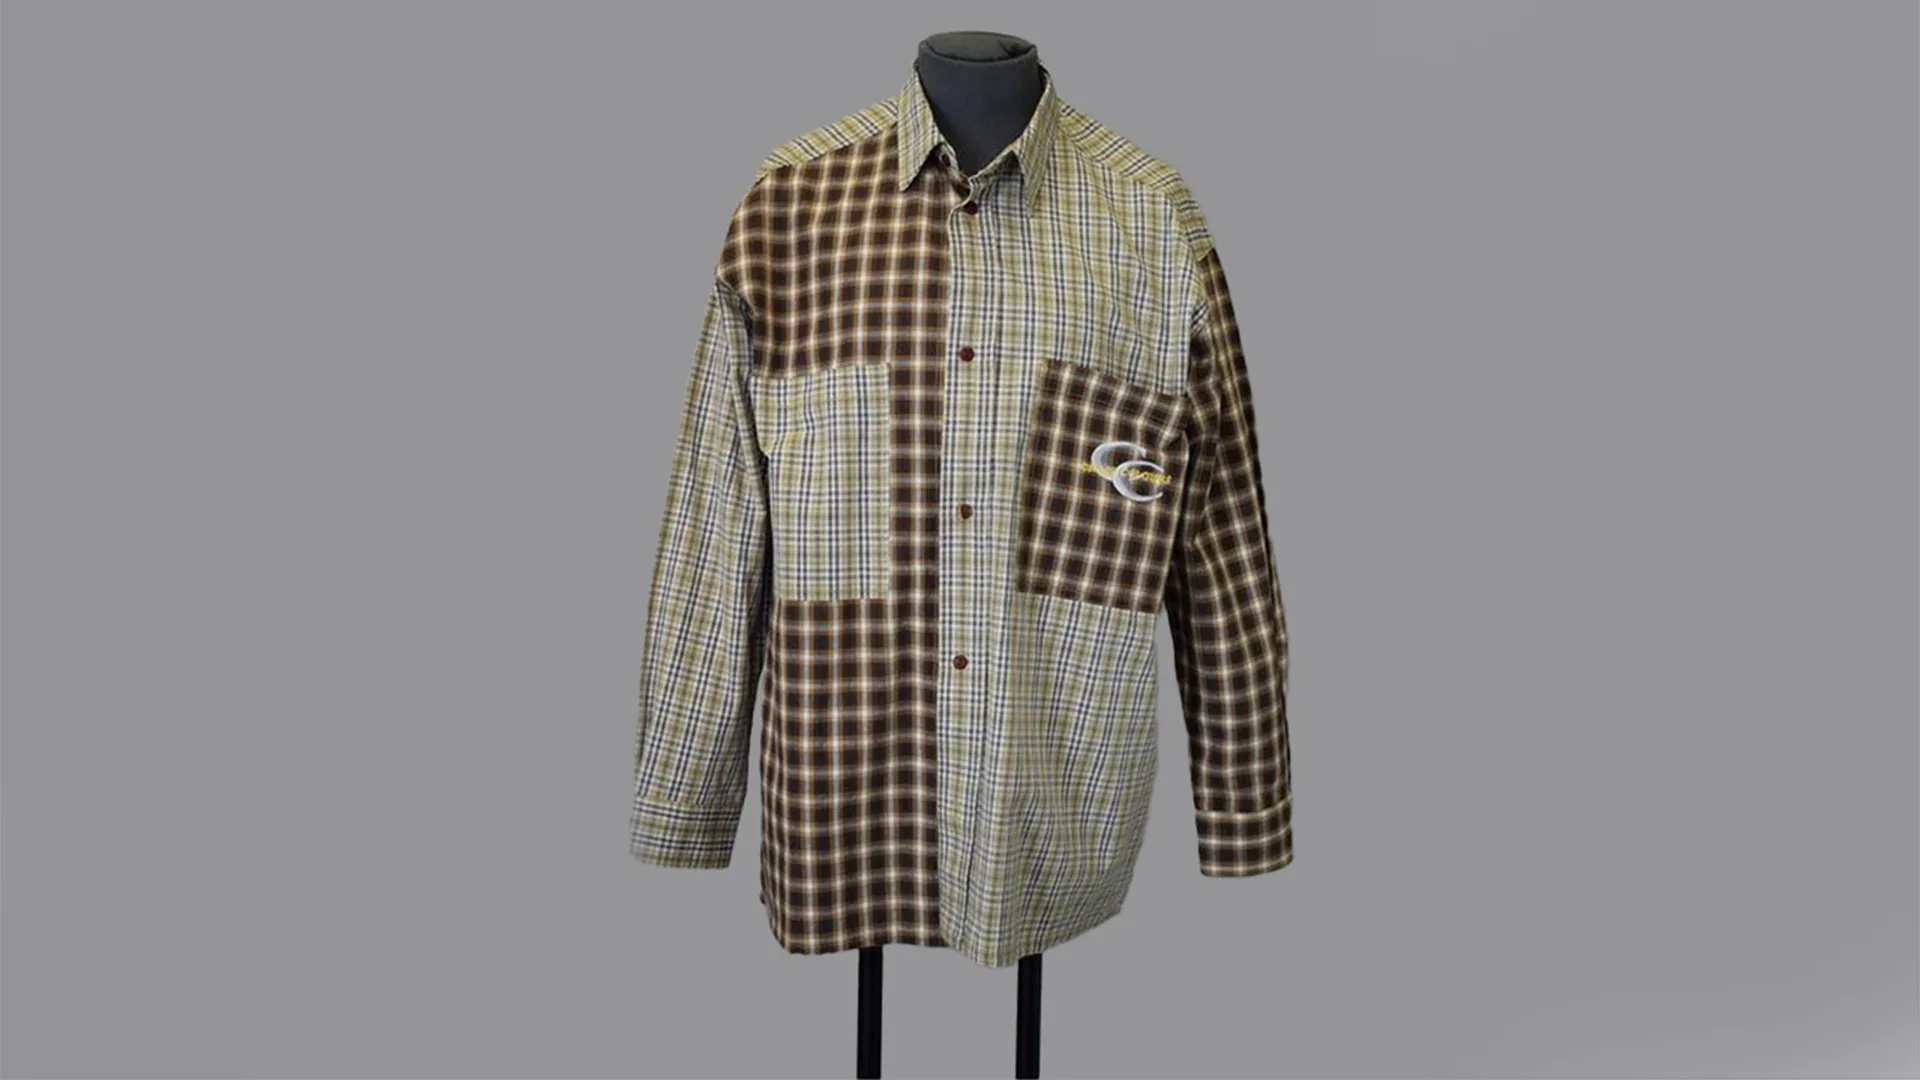 A patterned cotton shirt with large pockets and a logo on the right.